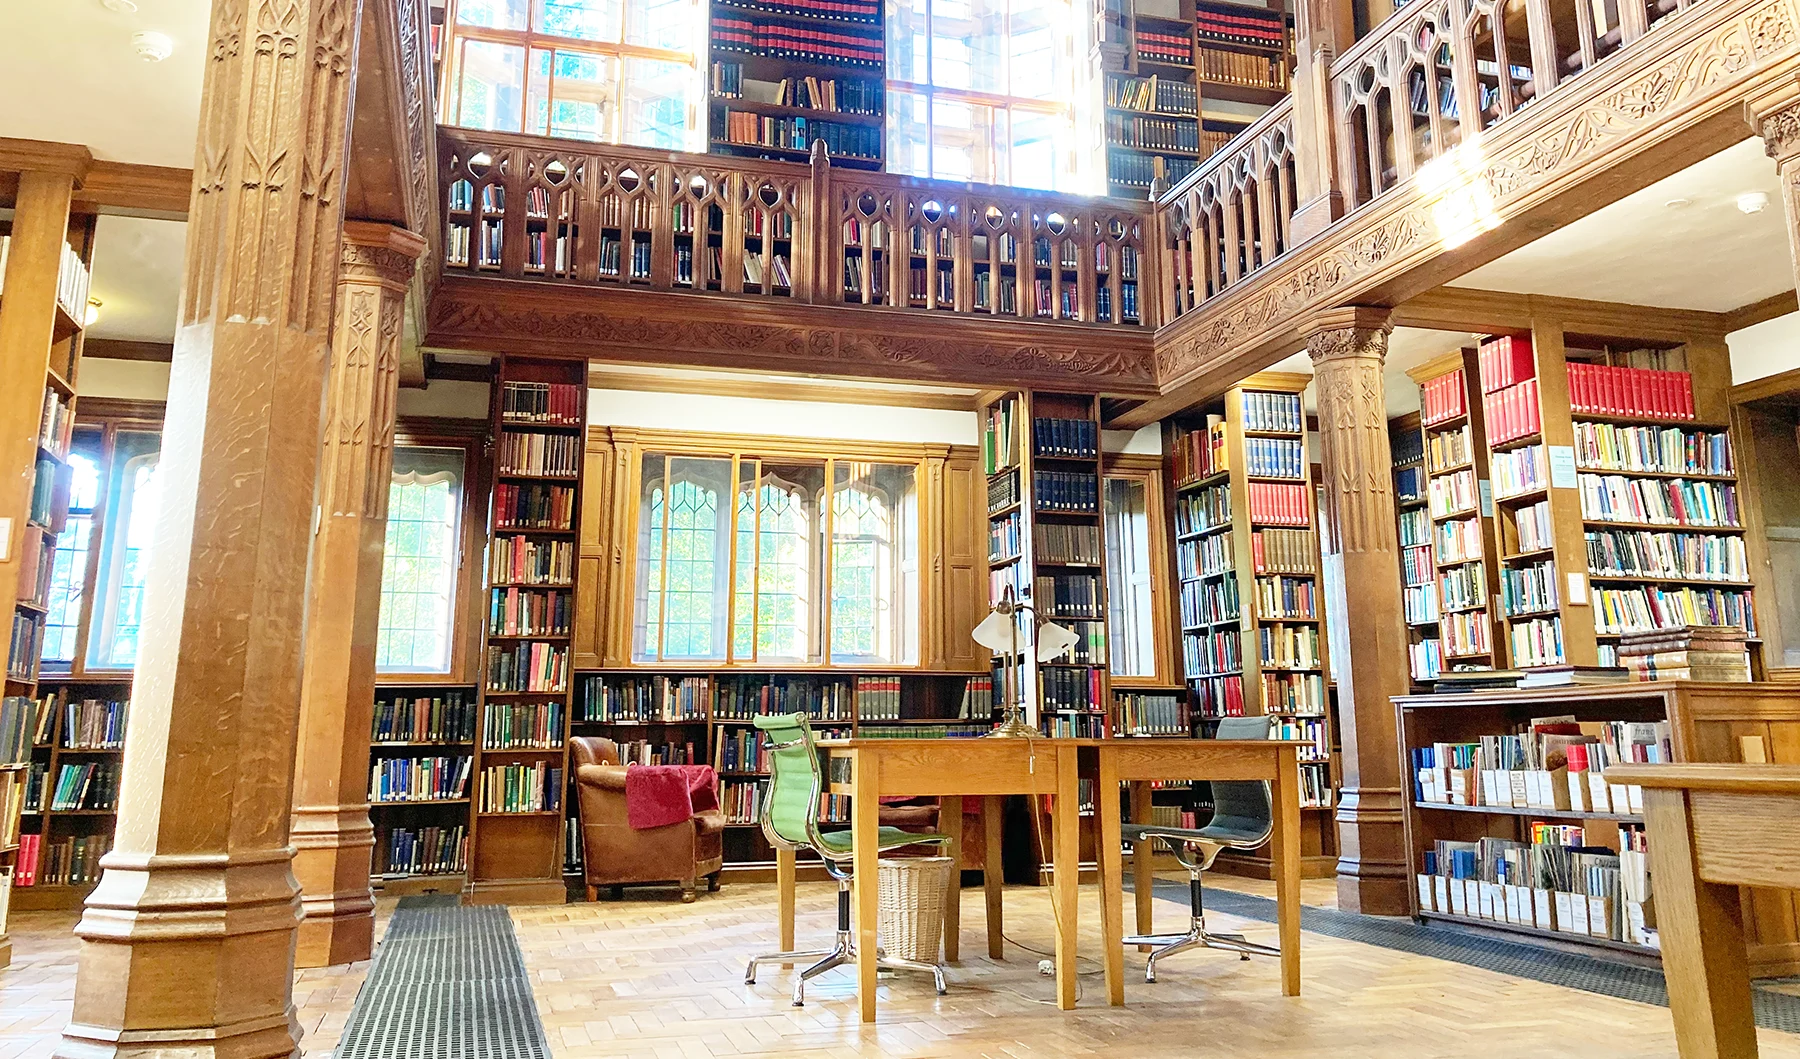 Inside a double-height historical library room with large windows and wooden balcony overlooking a reading area surrounded by bookshelves.